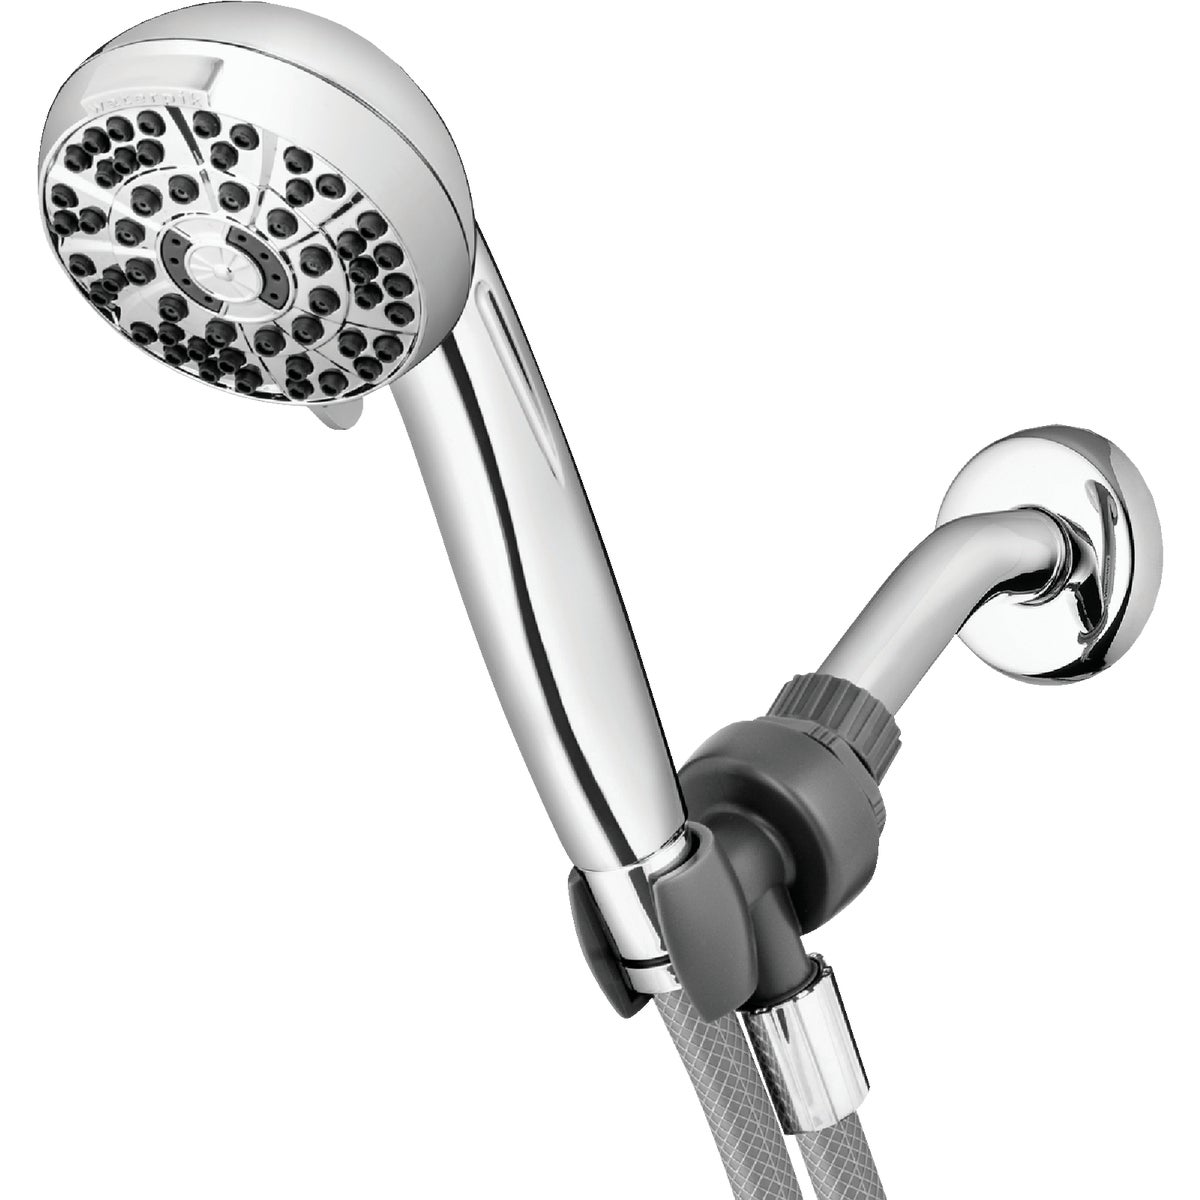 Item 403503, Wake up every day to a more powerful and invigorating shower massage.